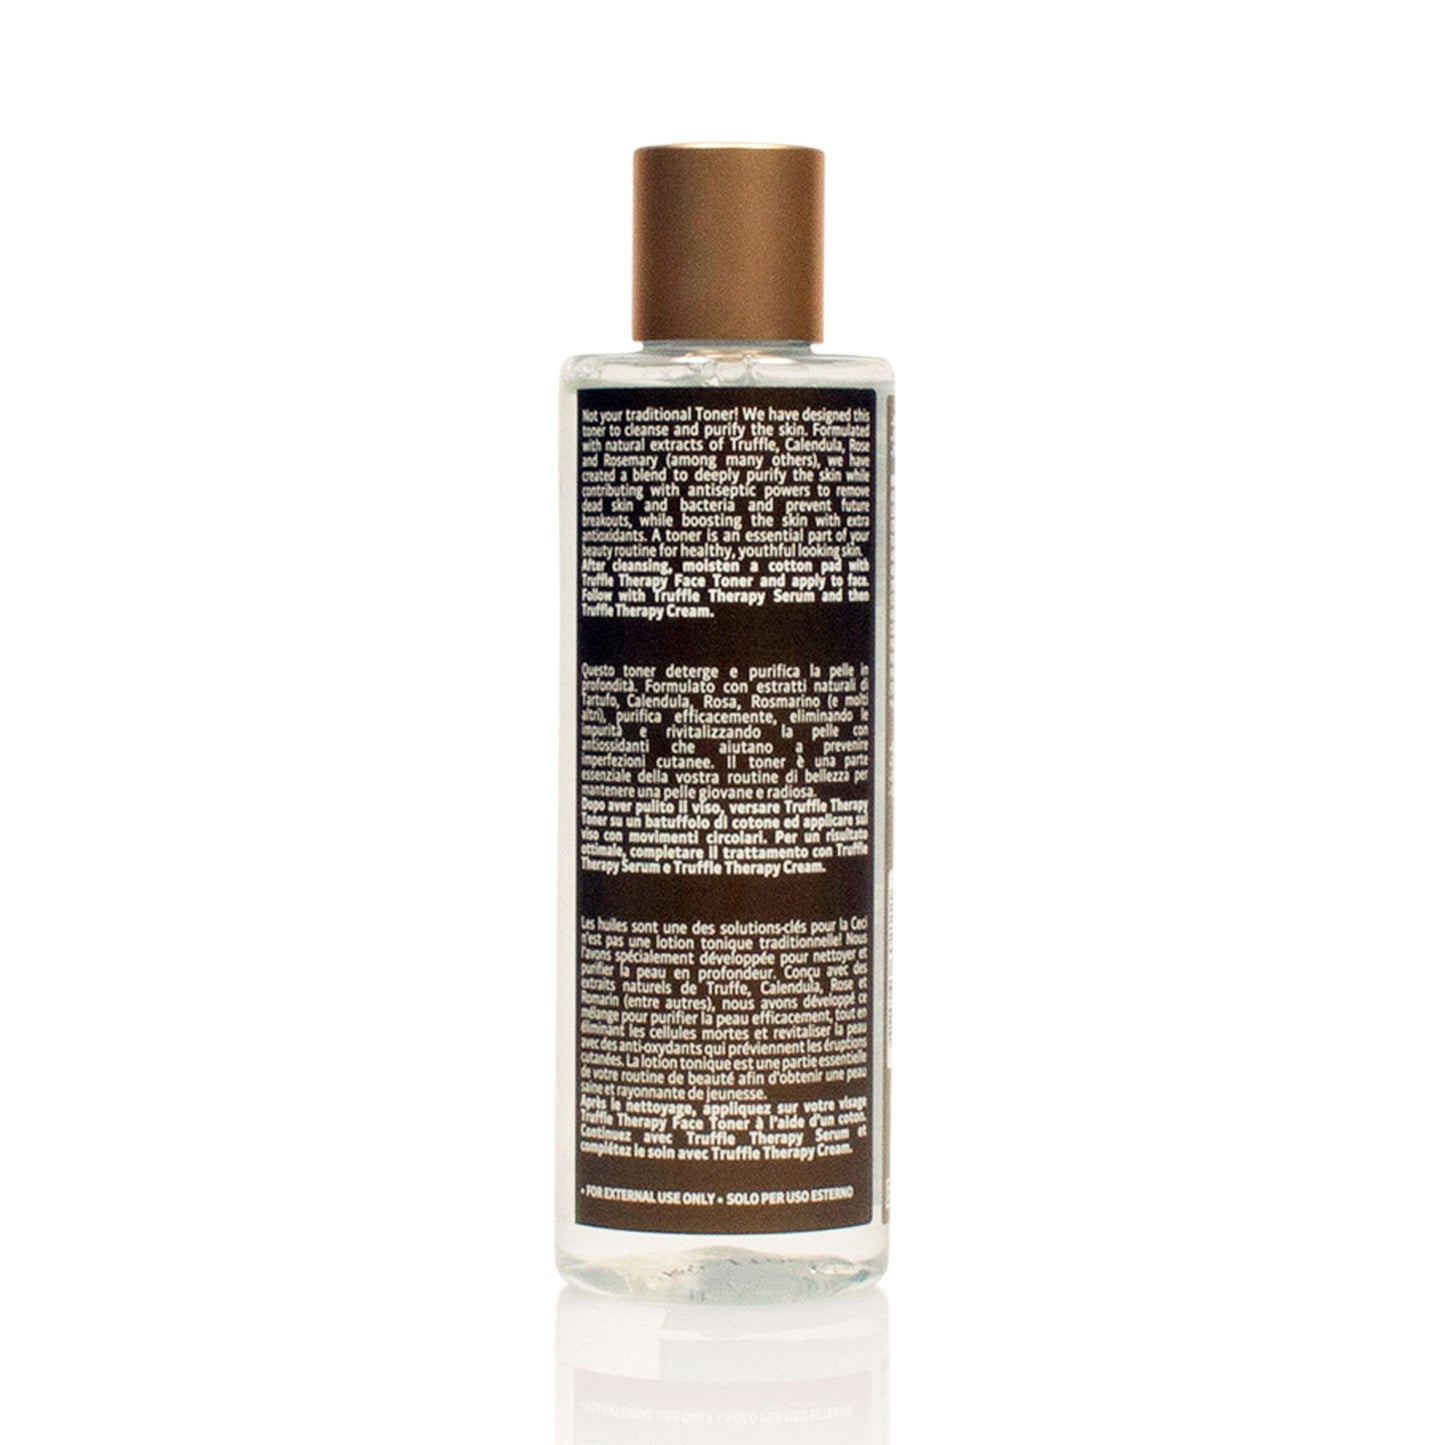 SKIN & CO TRUFFLE THERAPY FACE TONER